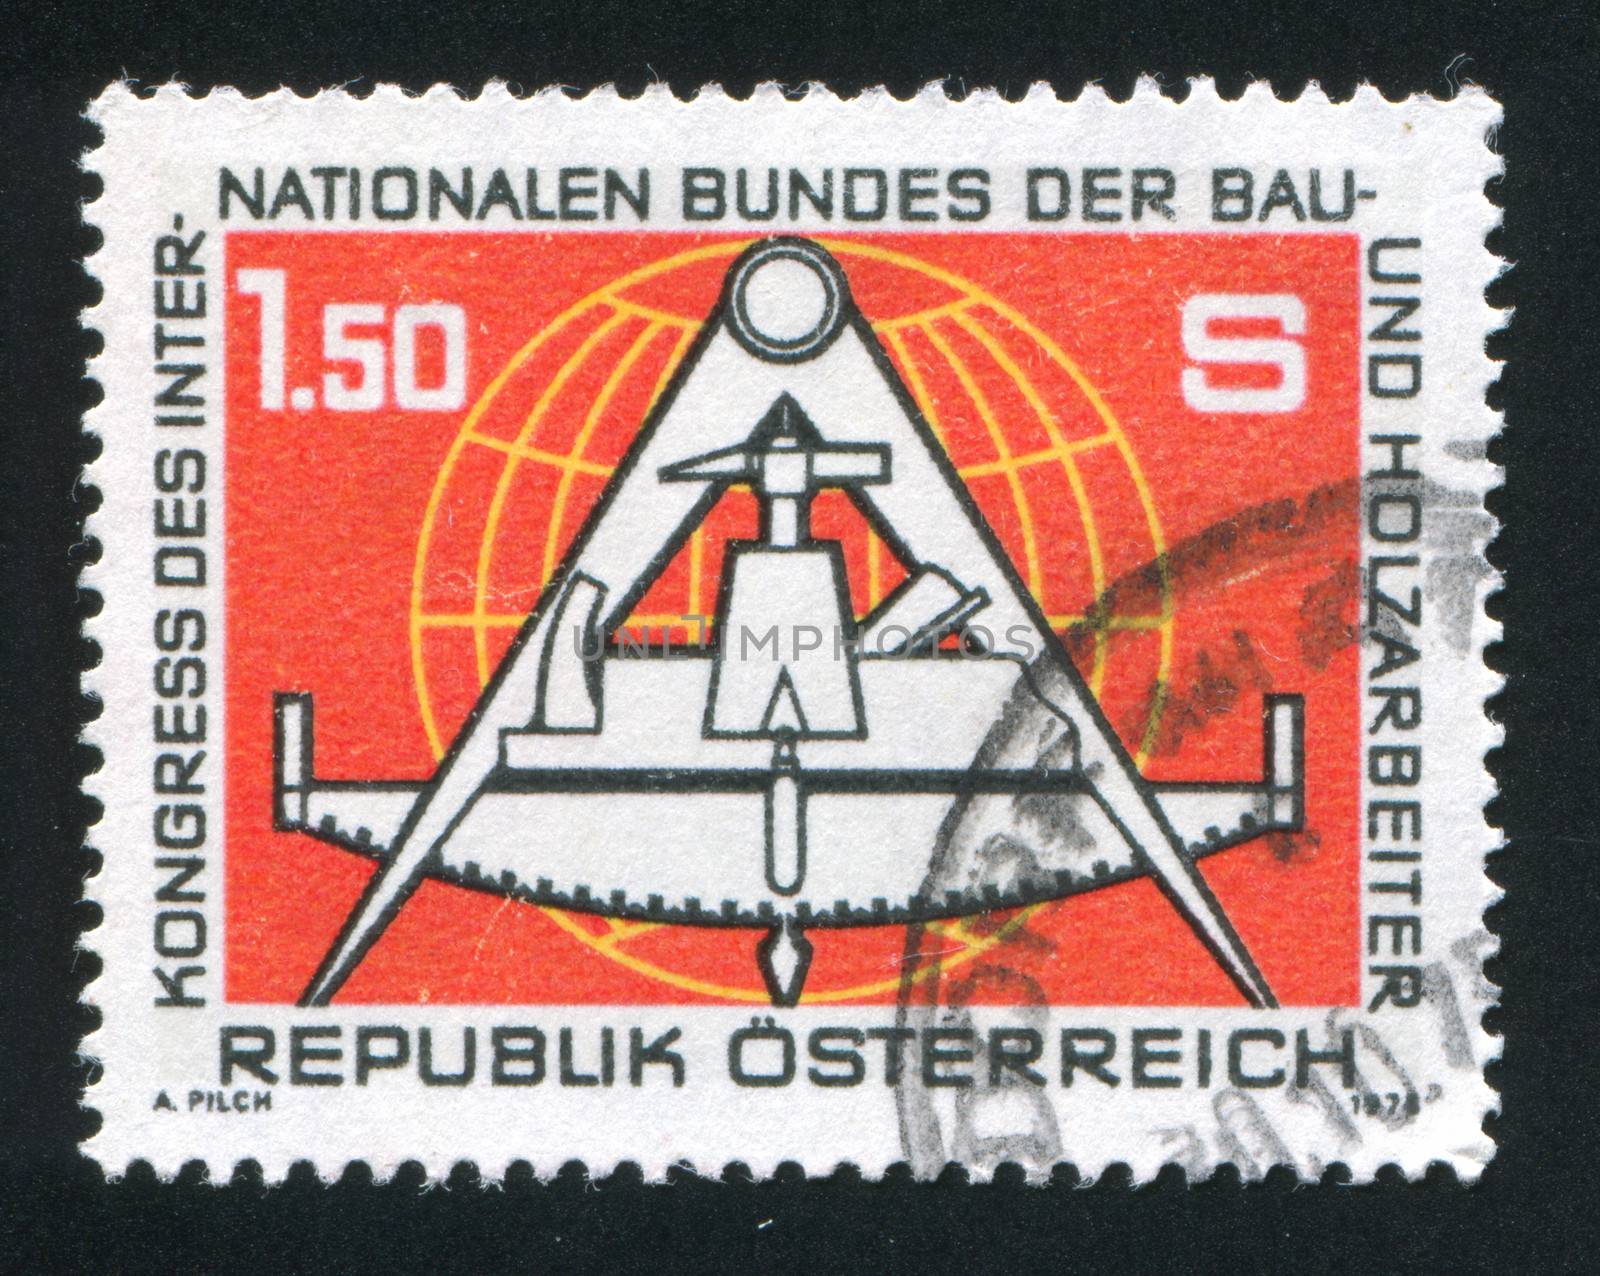 AUSTRIA - CIRCA 1978: stamp printed by Austria, shows  Emblem of International Federation of Building Construction and Wood Workers, circa 1978